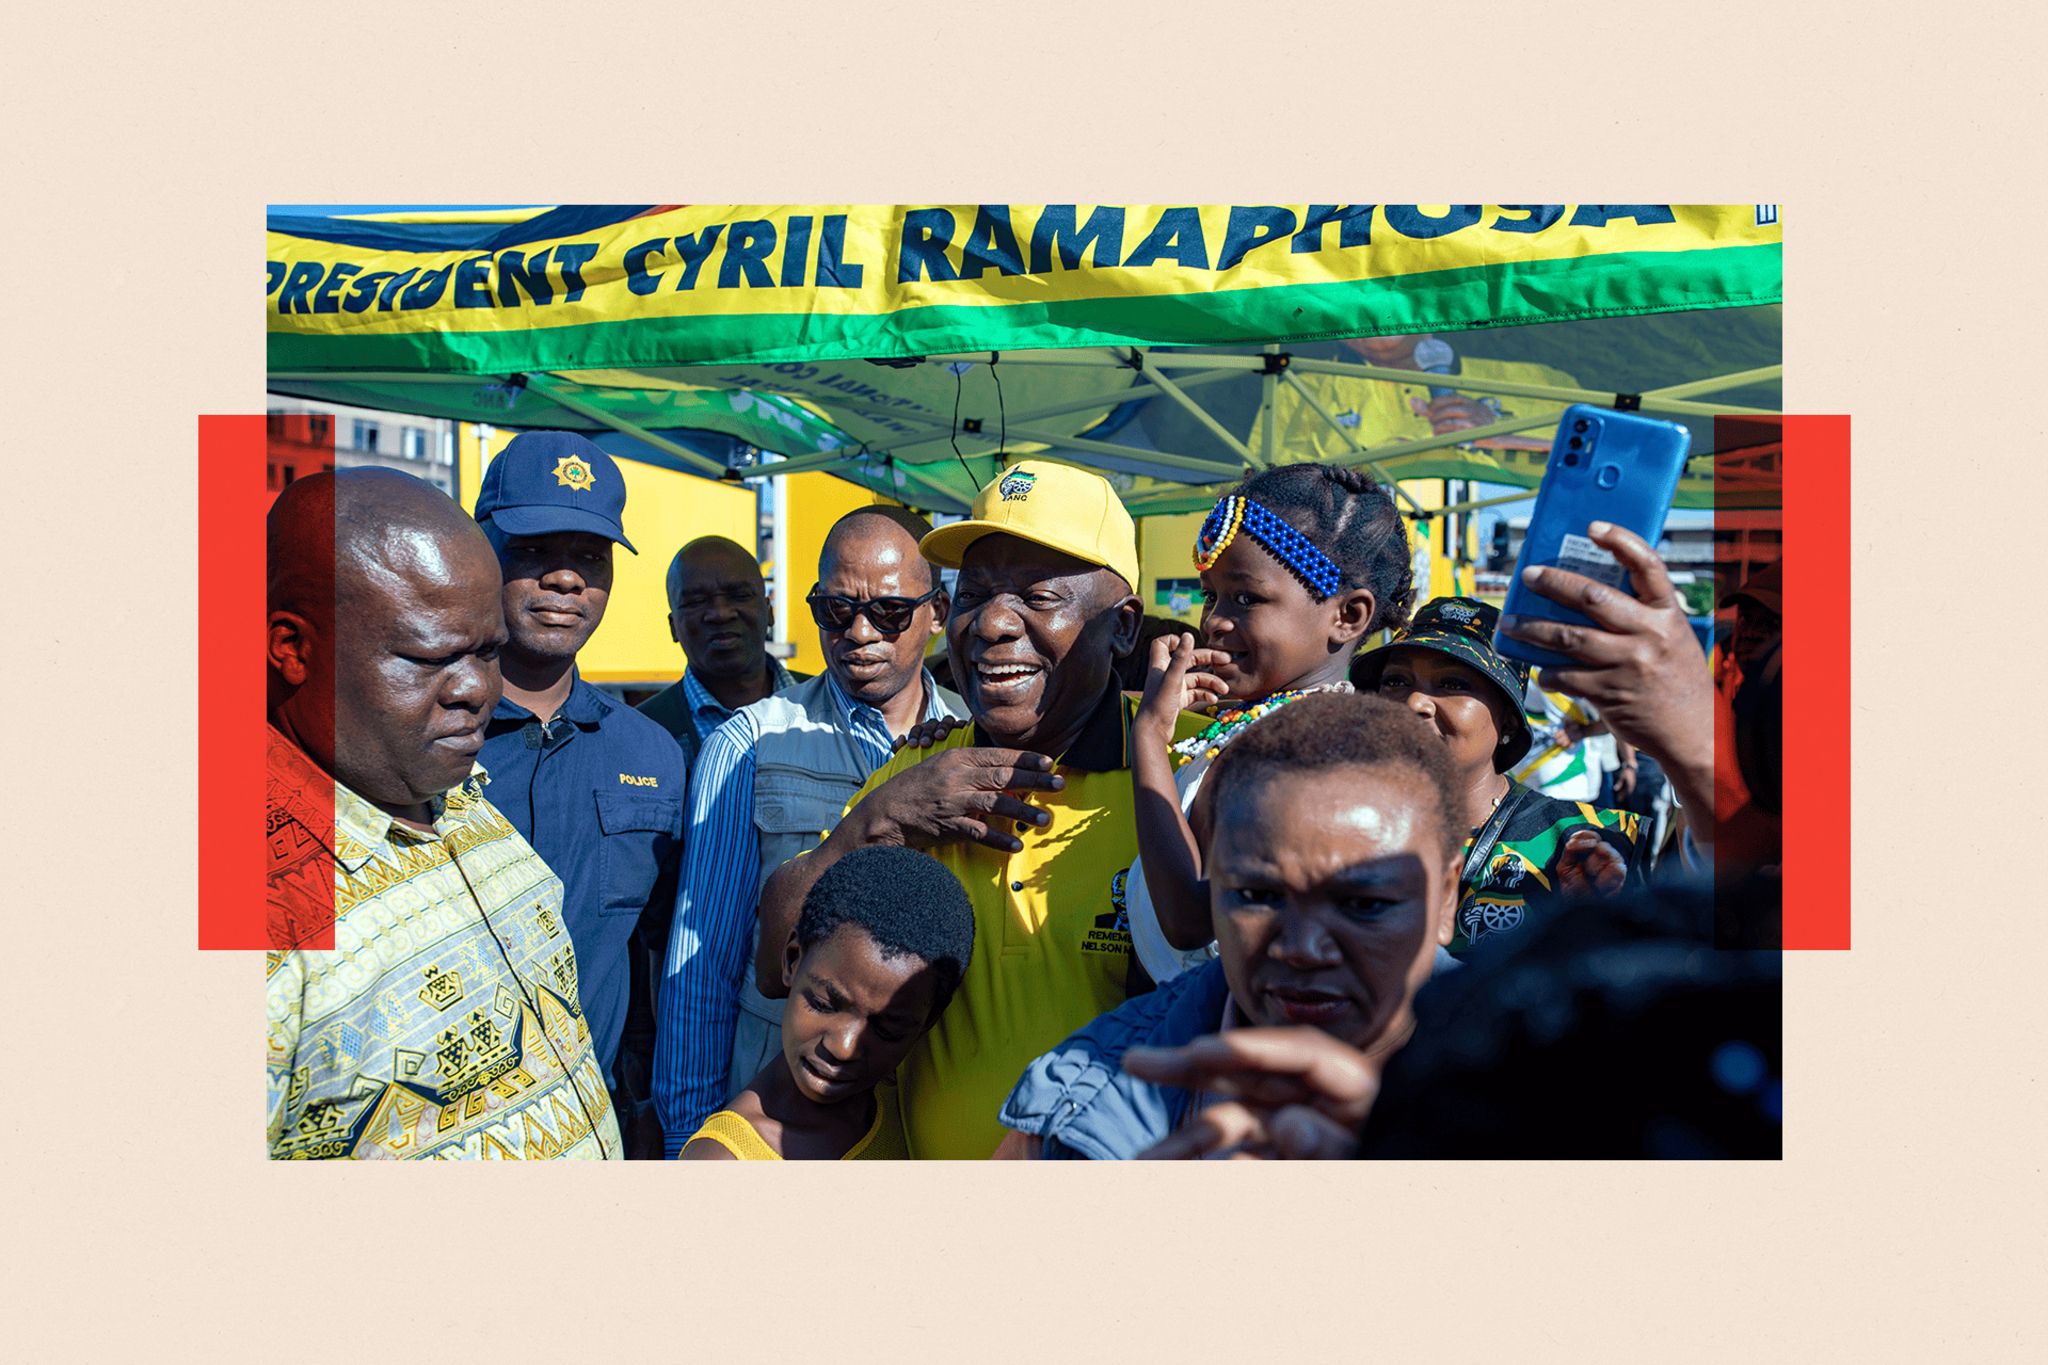 South African president Cyril Ramaphosa out campaigning